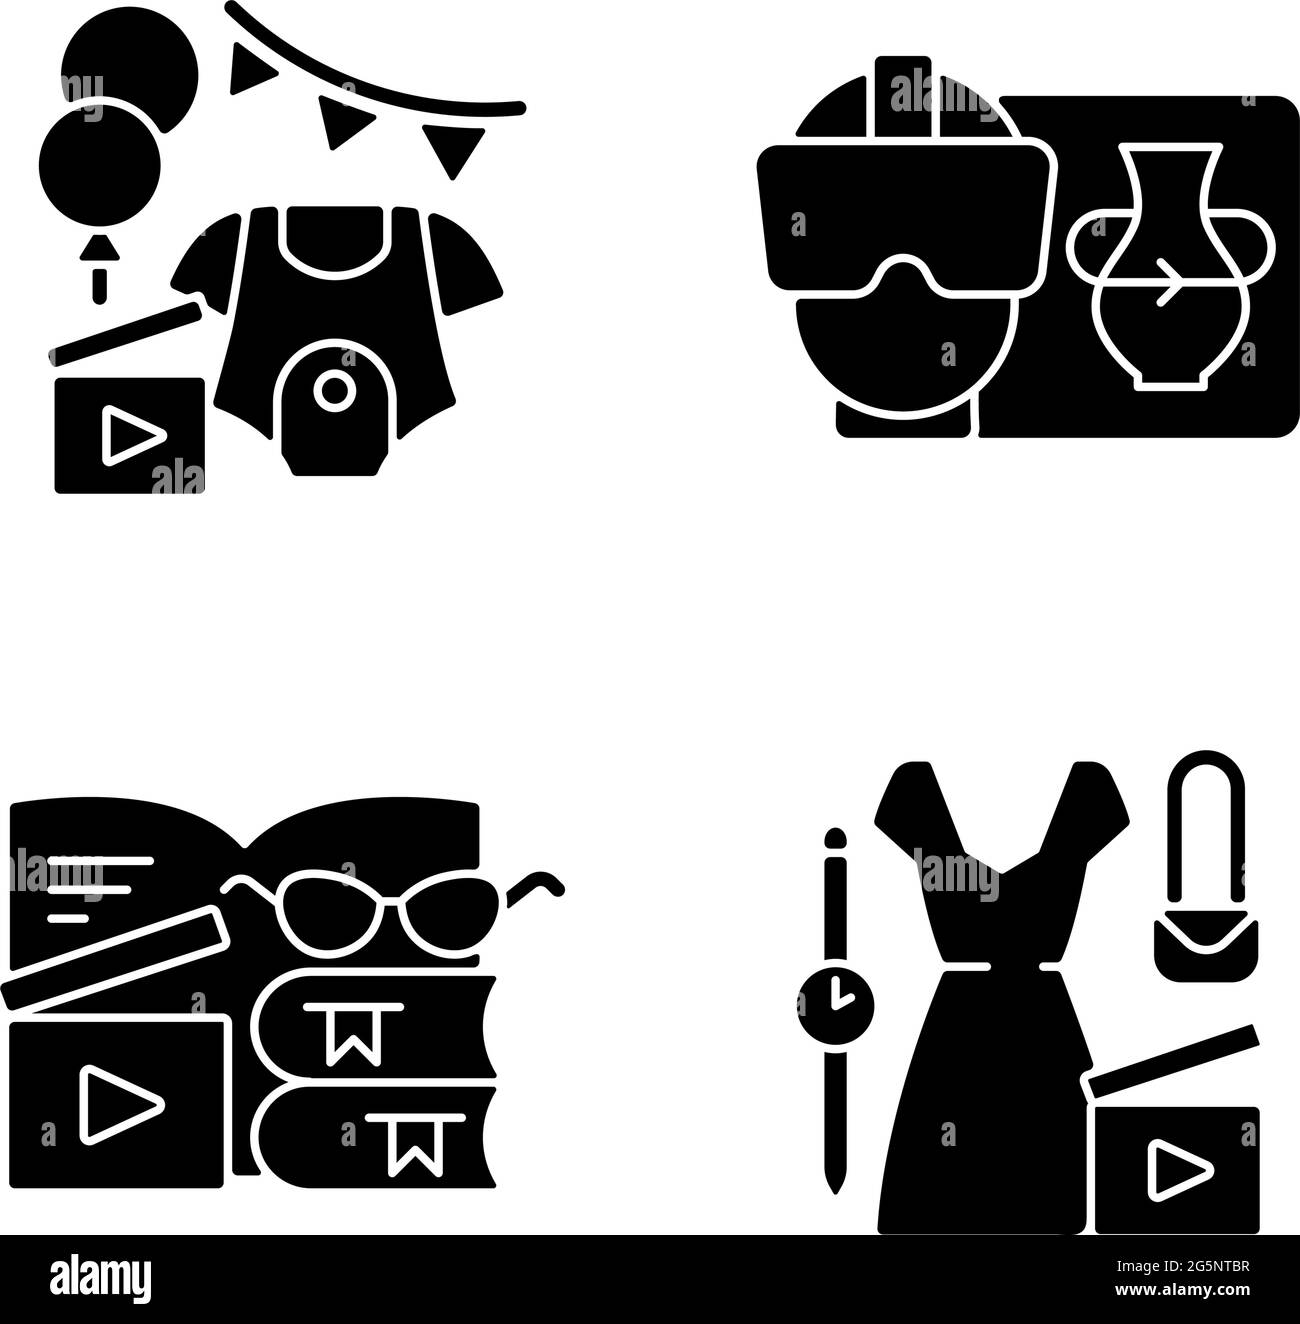 Types of video black glyph icons set on white space Stock Vector